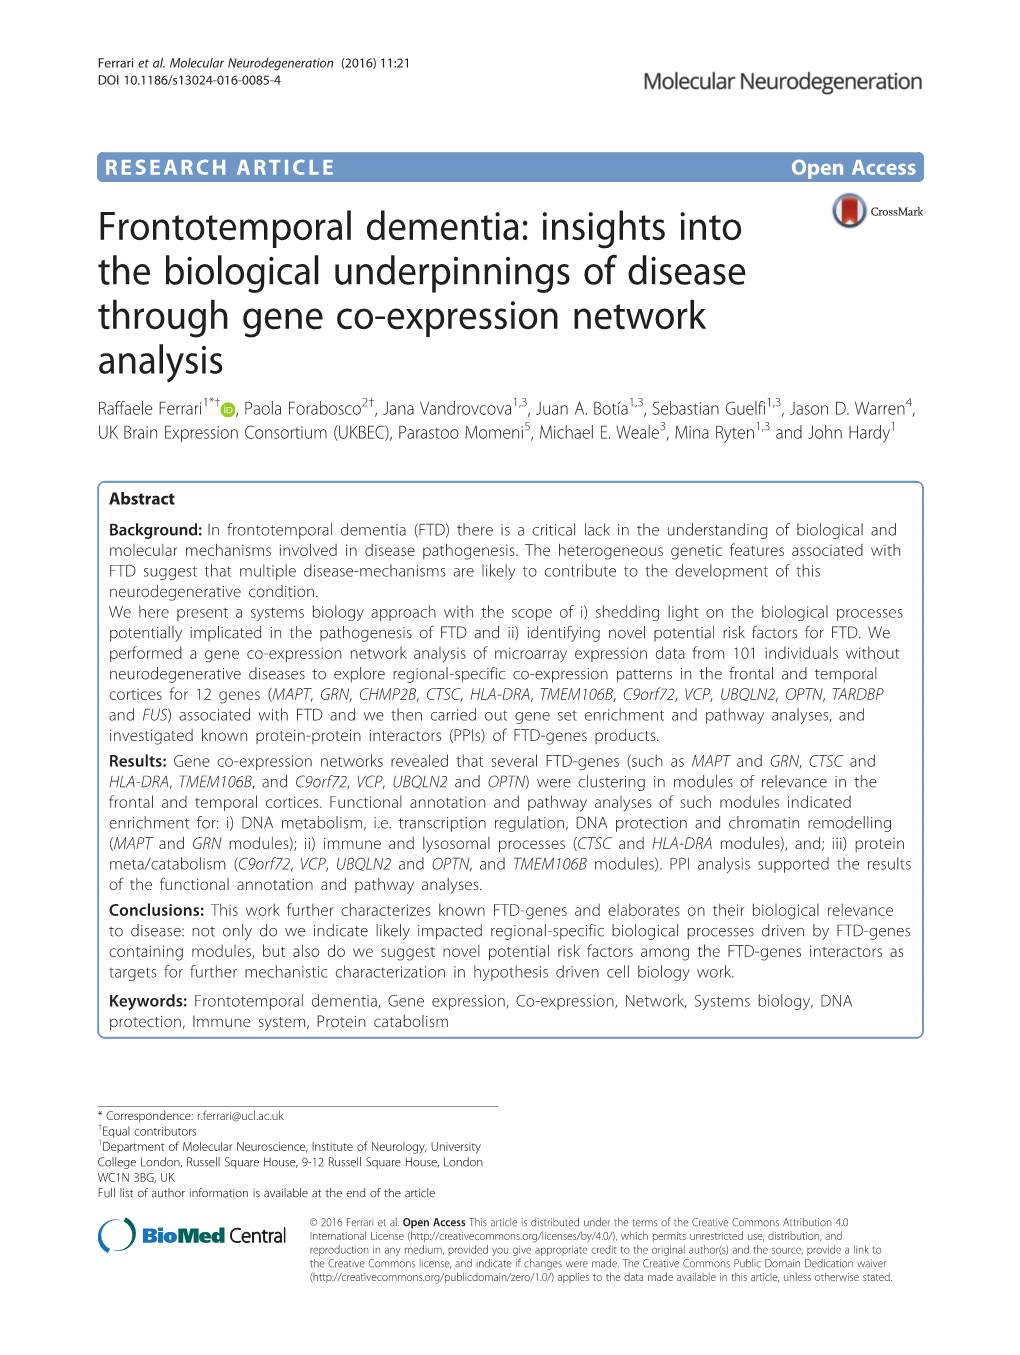 Frontotemporal Dementia: Insights Into the Biological Underpinnings of Disease Through Gene Co-Expression Network Analysis